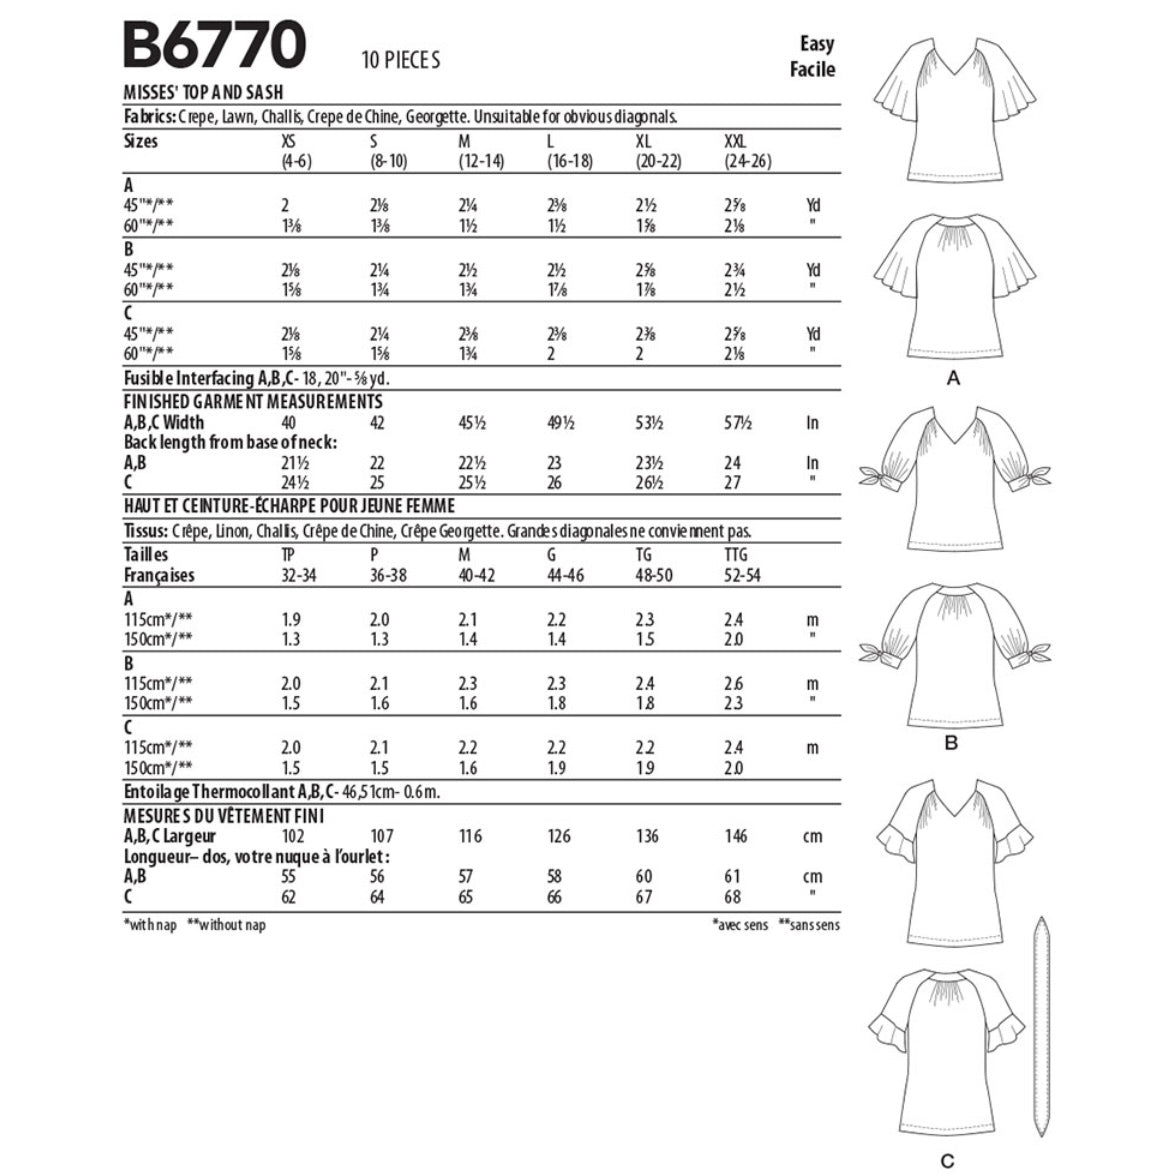 Butterick B6770 Top and Sash Sewing Pattern